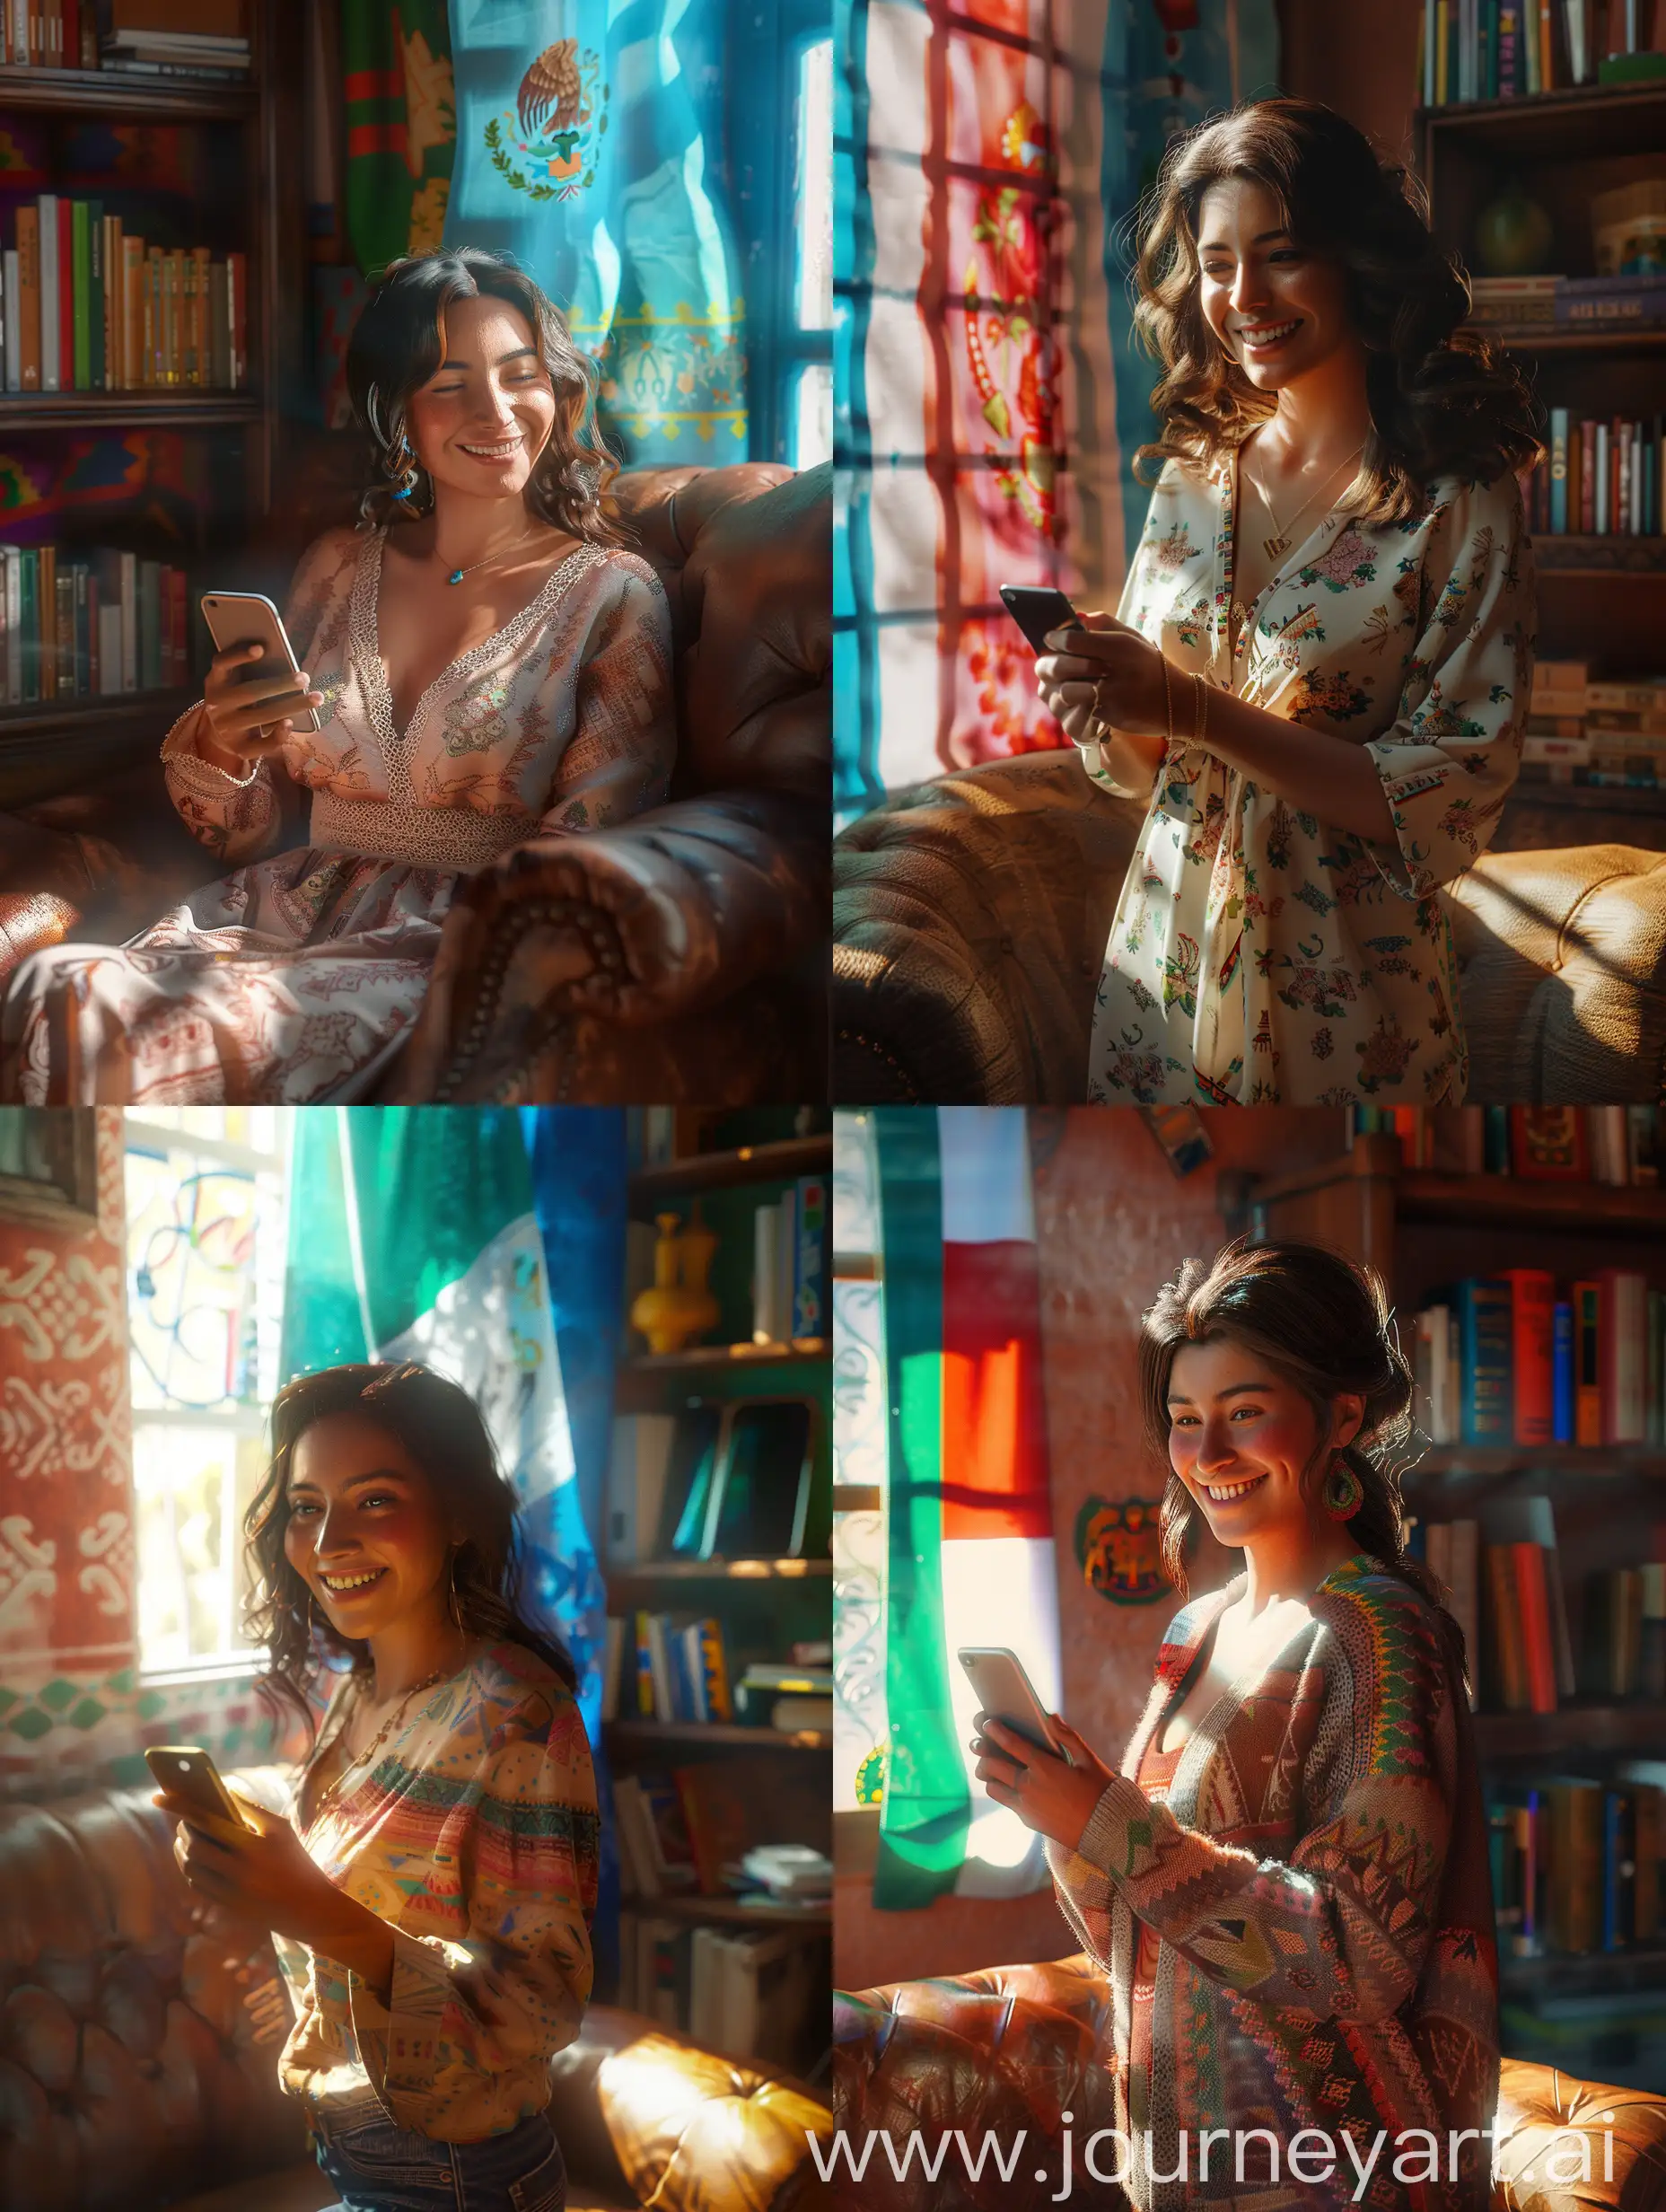 ate photo very realistic of a Spanish 18YO Mexican woman, smiling, holding a smartphone and warm sunlight streaming through the window." "Photorealistic image of a vibrant and colorful living room decorated with traditional Mexican textiles." "35mm film photograph of a cozy living room with a worn leather armchair and shelves filled with books." with the Mexcian flag bluer in the background the image needs to be realistic for ads, the woman is very sexy